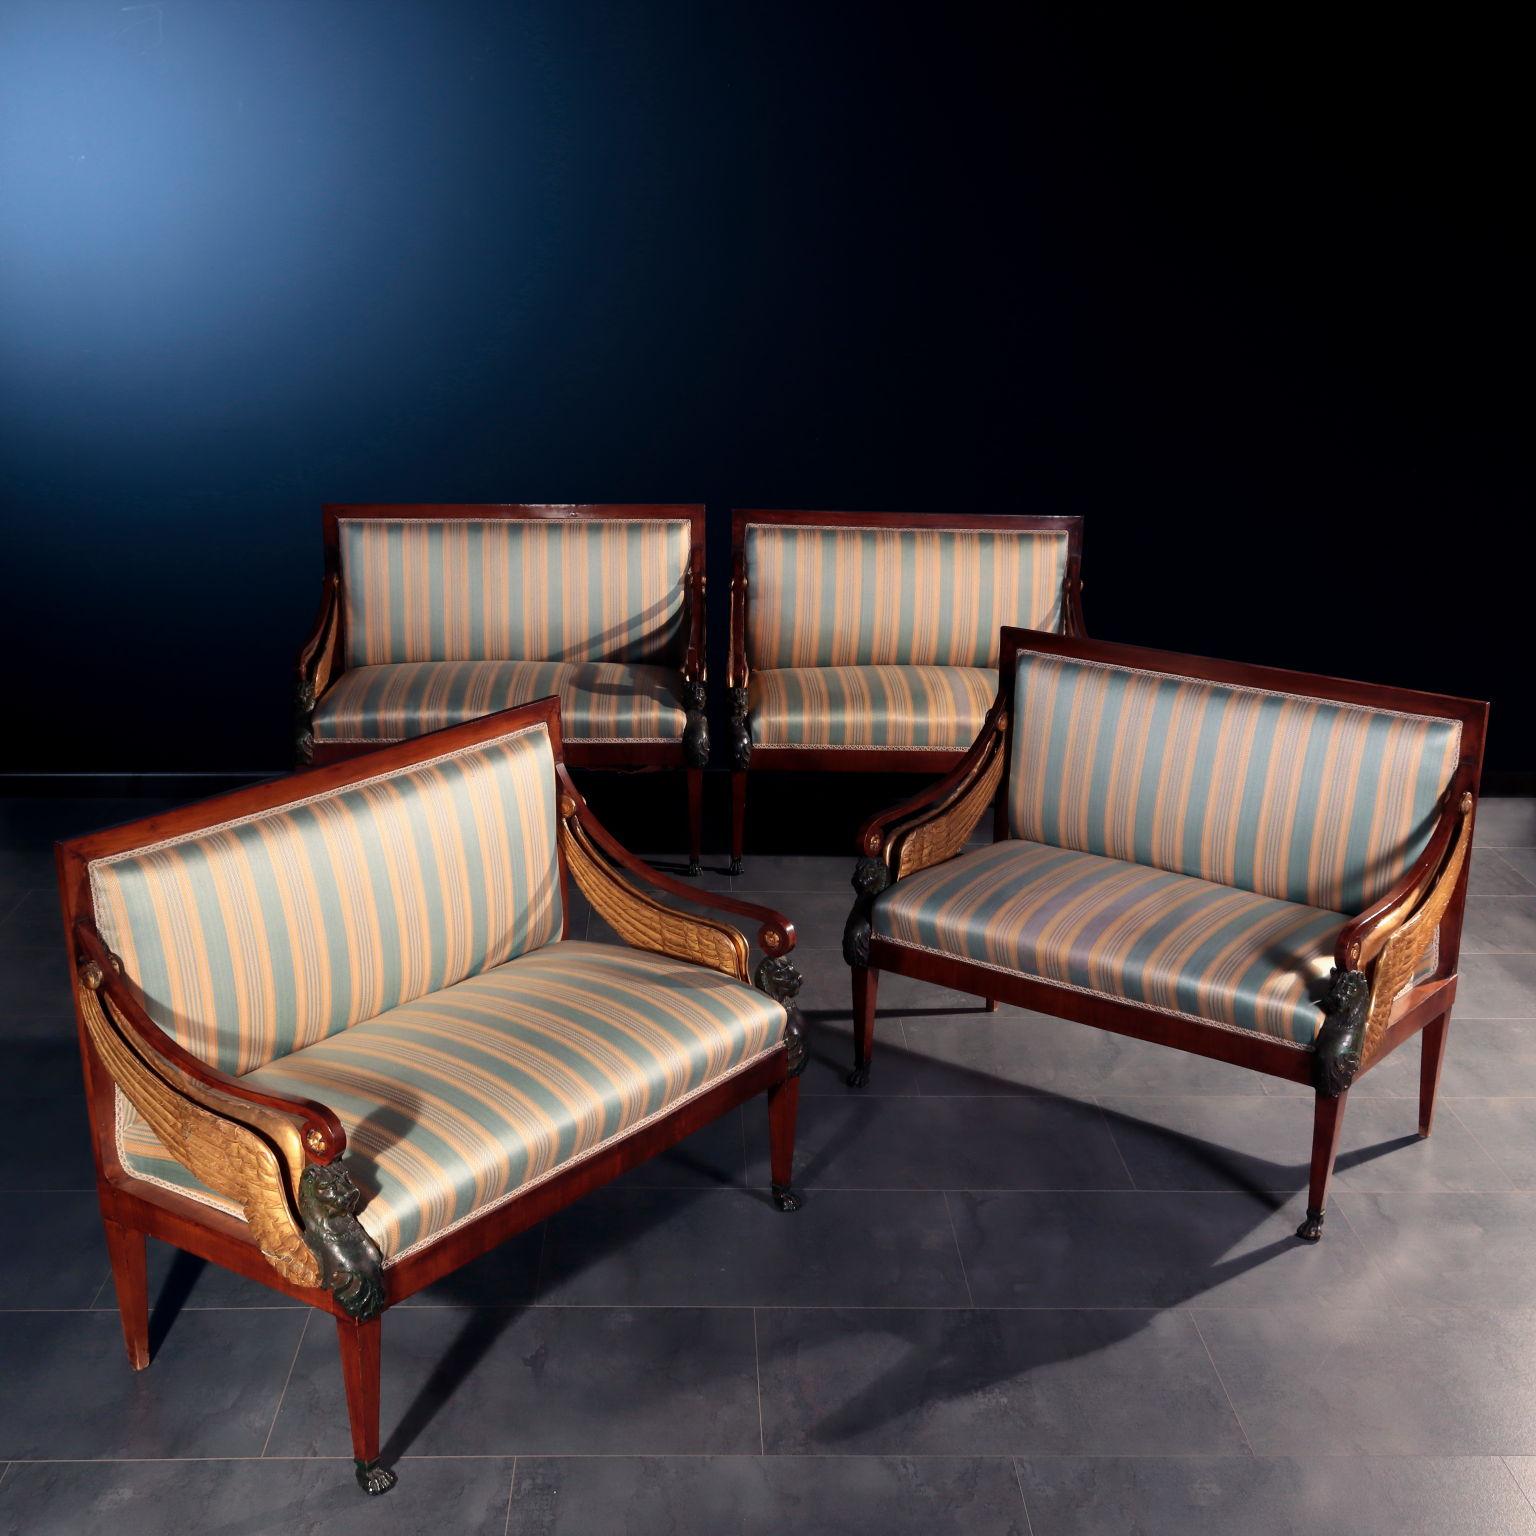 Group of four settees supported by truncated pyramidal legs, the front ones have feet in the shape of feral paws. The uprights of the armrests are carved with the features of griffins, the lion bust is lacquered with an imitation burnishing, seeking